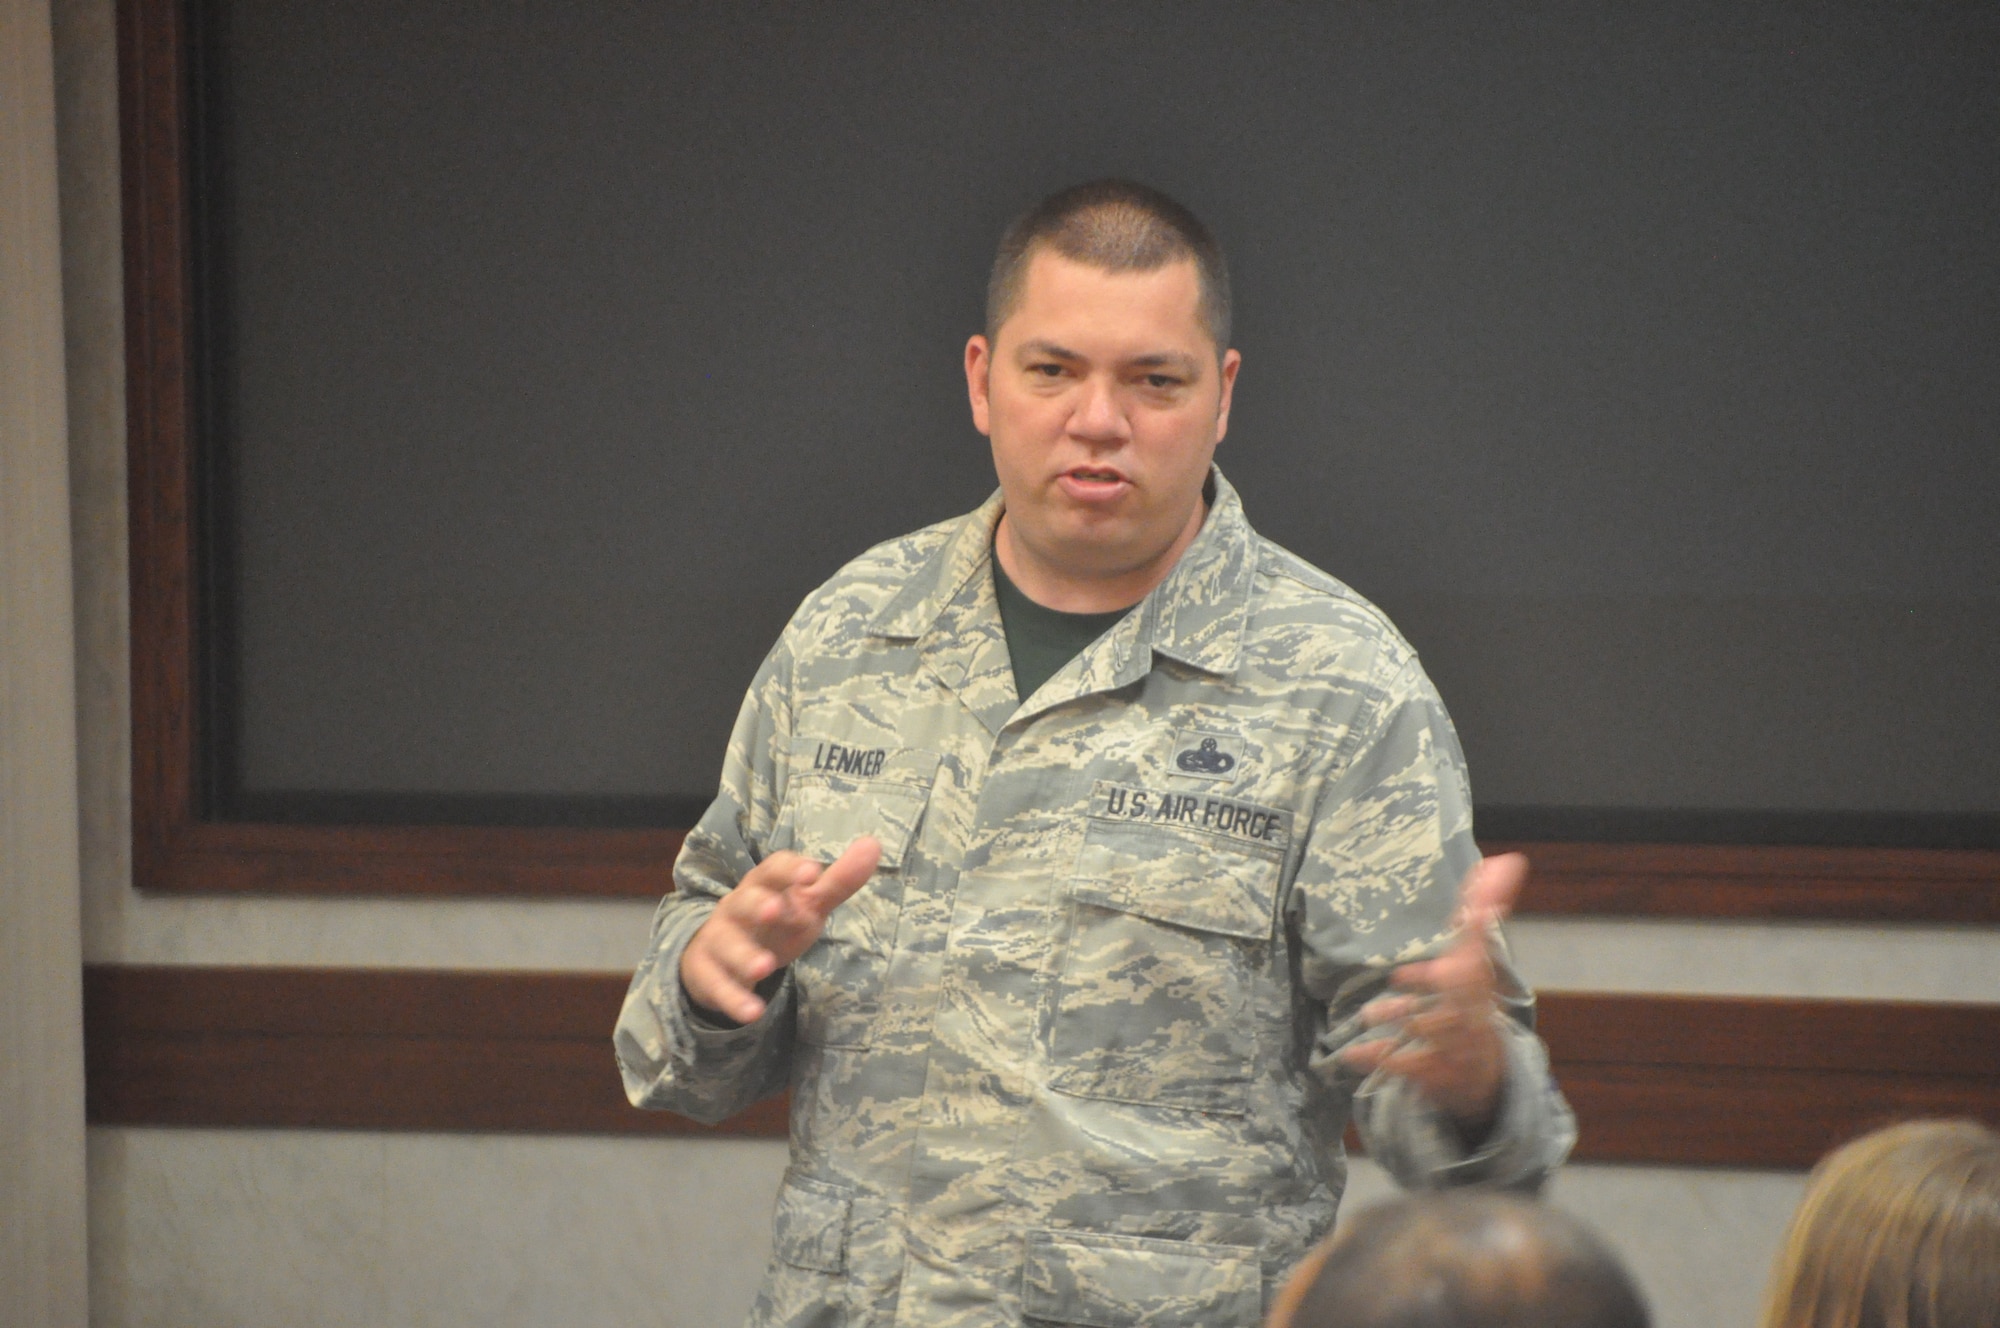 Operations Training and Procedures manager for the Flight Standards Agency, Master Sgt. Timothy Lenker, discusses how he became involved in teaching suicide prevention classes with the Wingman Day audience on June 21 in the Air Force Sustainment Center Anaconda Room. (U.S. Air Force photos/Megan Prather)